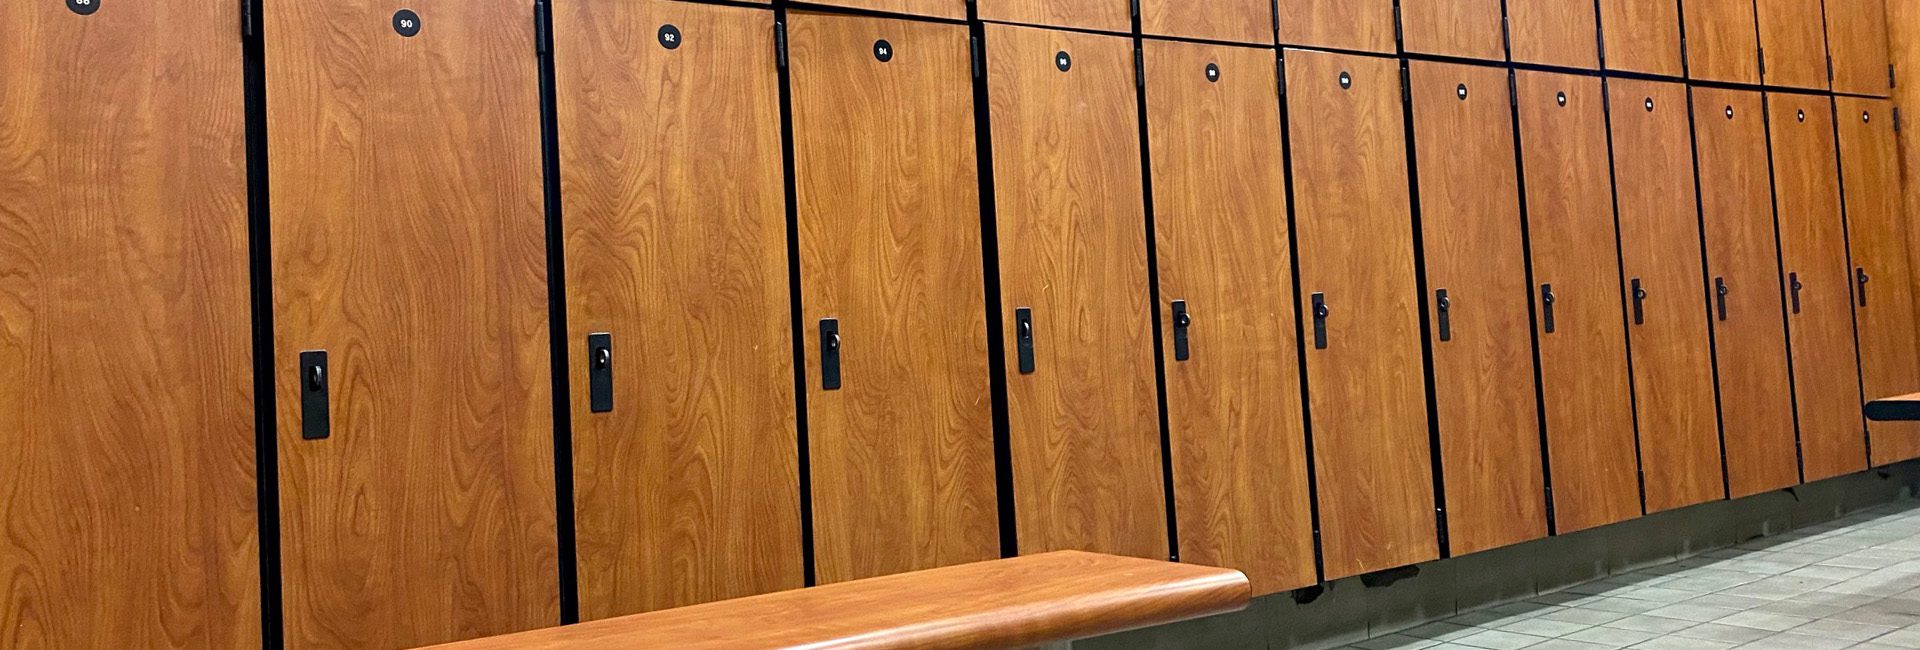 lockers at a gym in everett